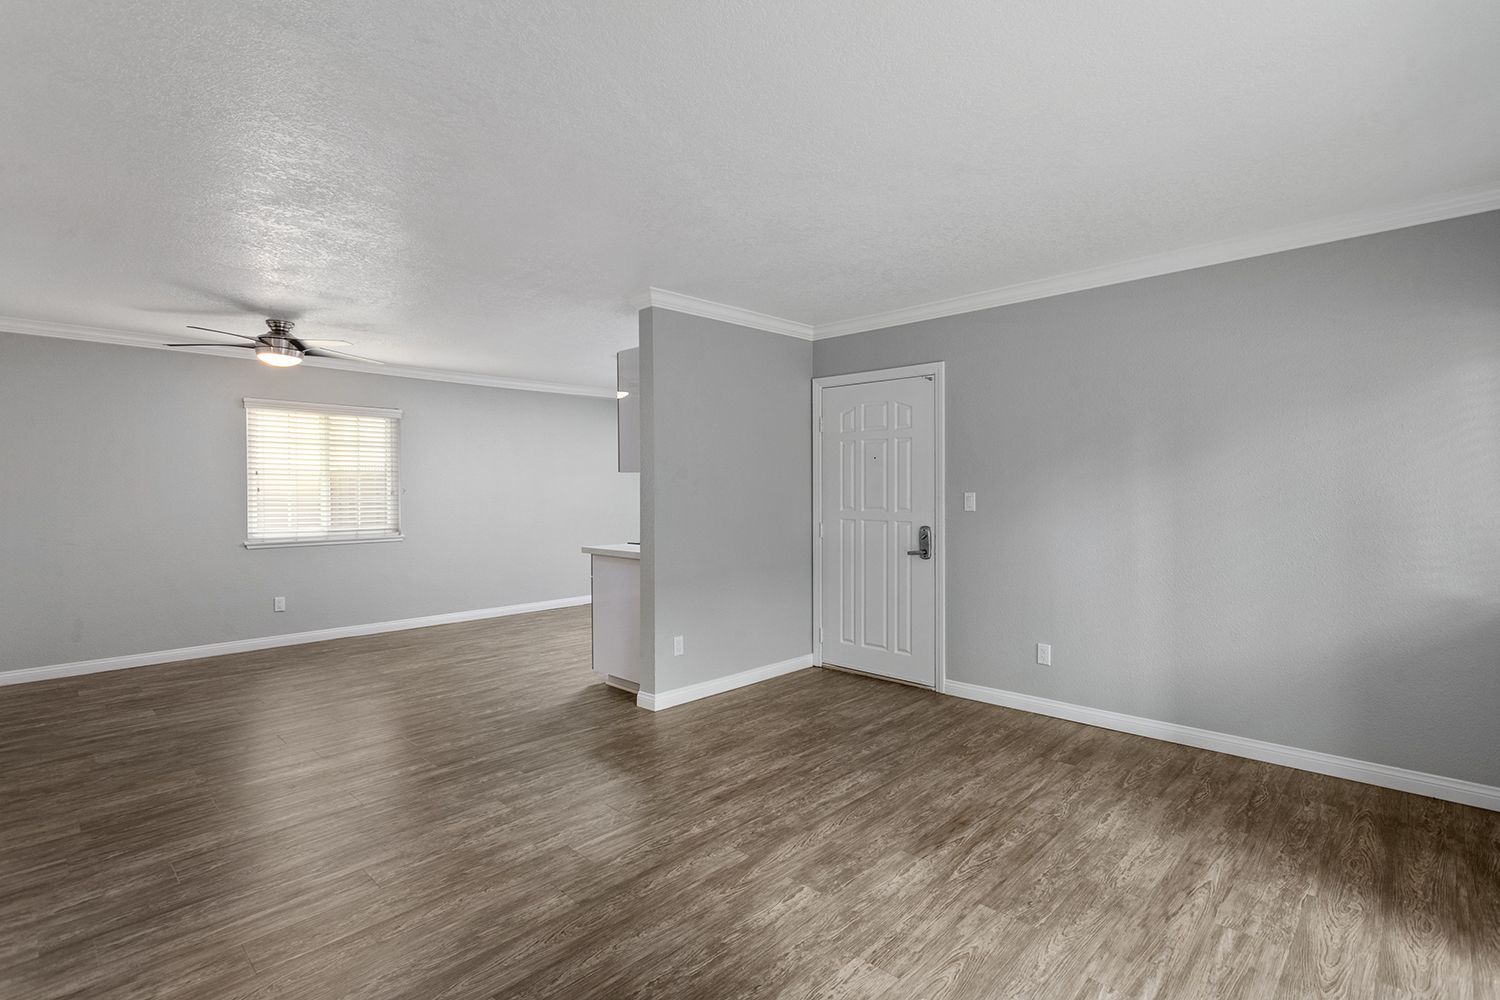 Photo gallery slider displaying the apartment amenities listed